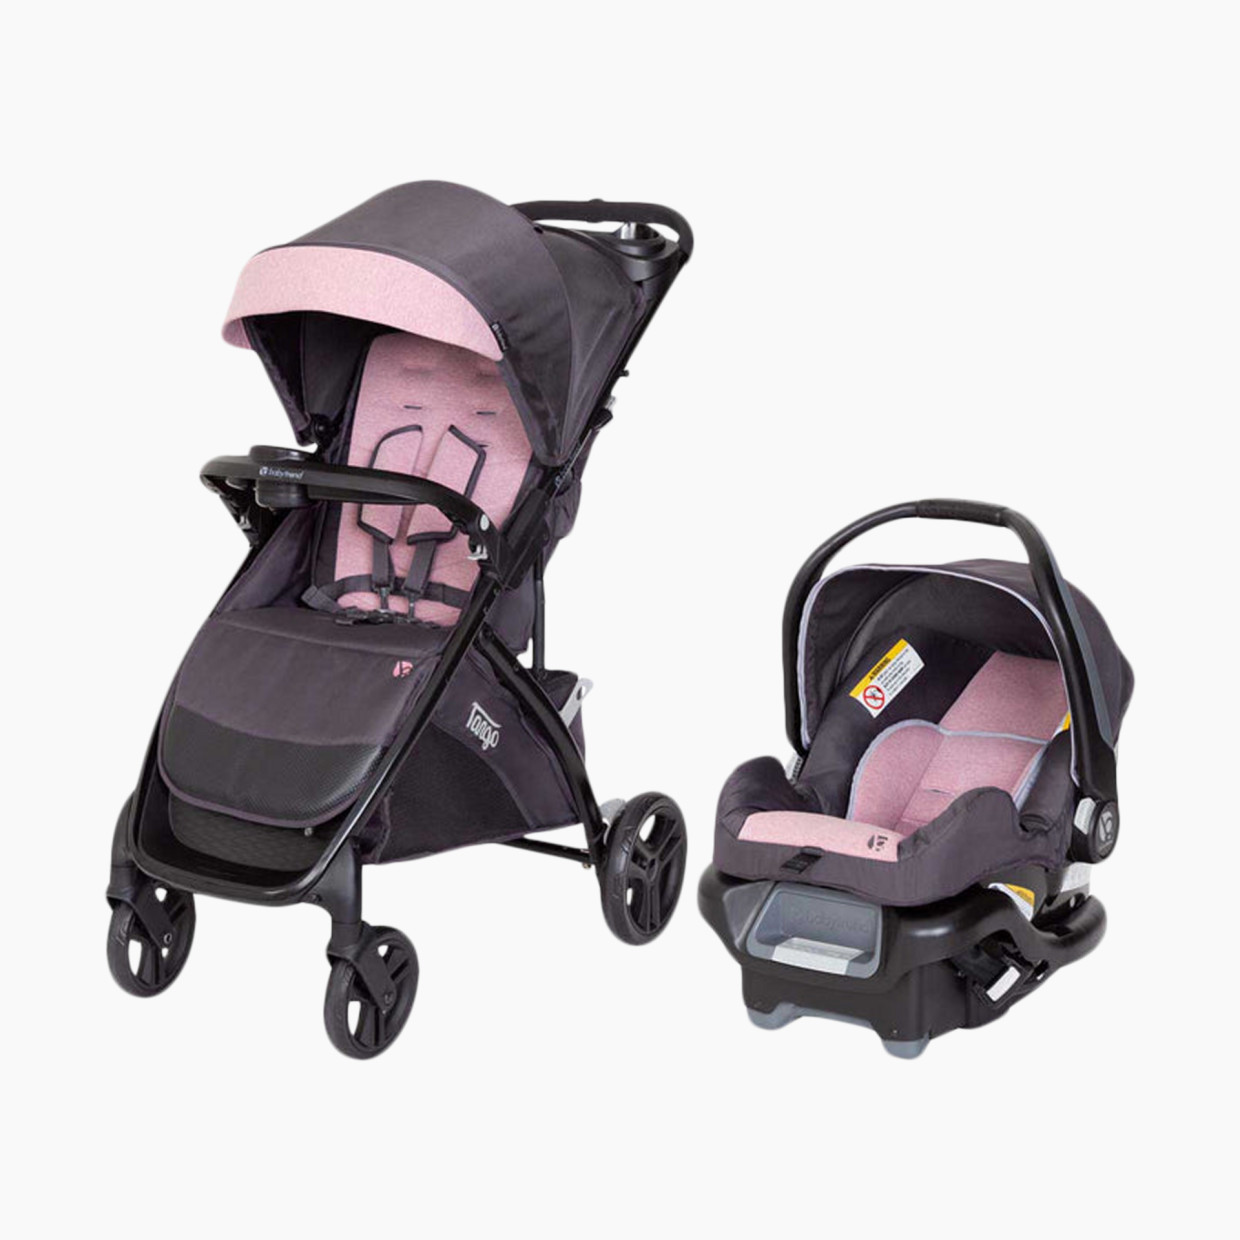 Baby Trend Tango Travel System - Cassis.